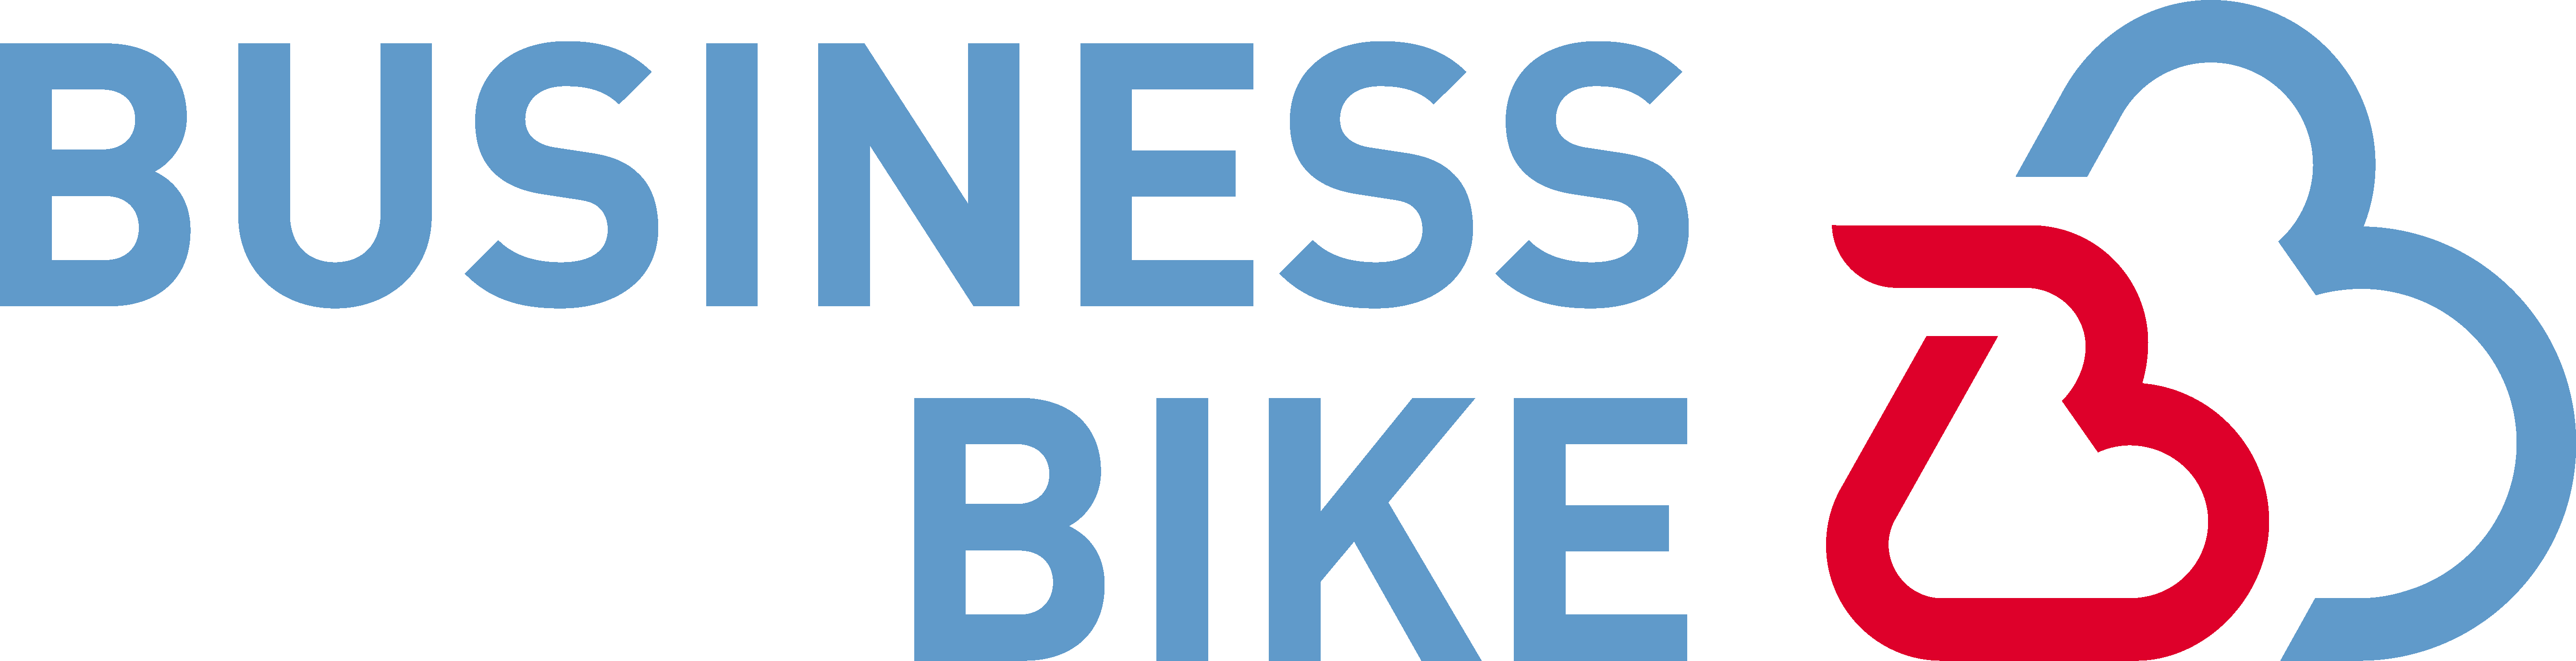 BusinessBike_pos_BLUE_RED_BLUE_rgb.png